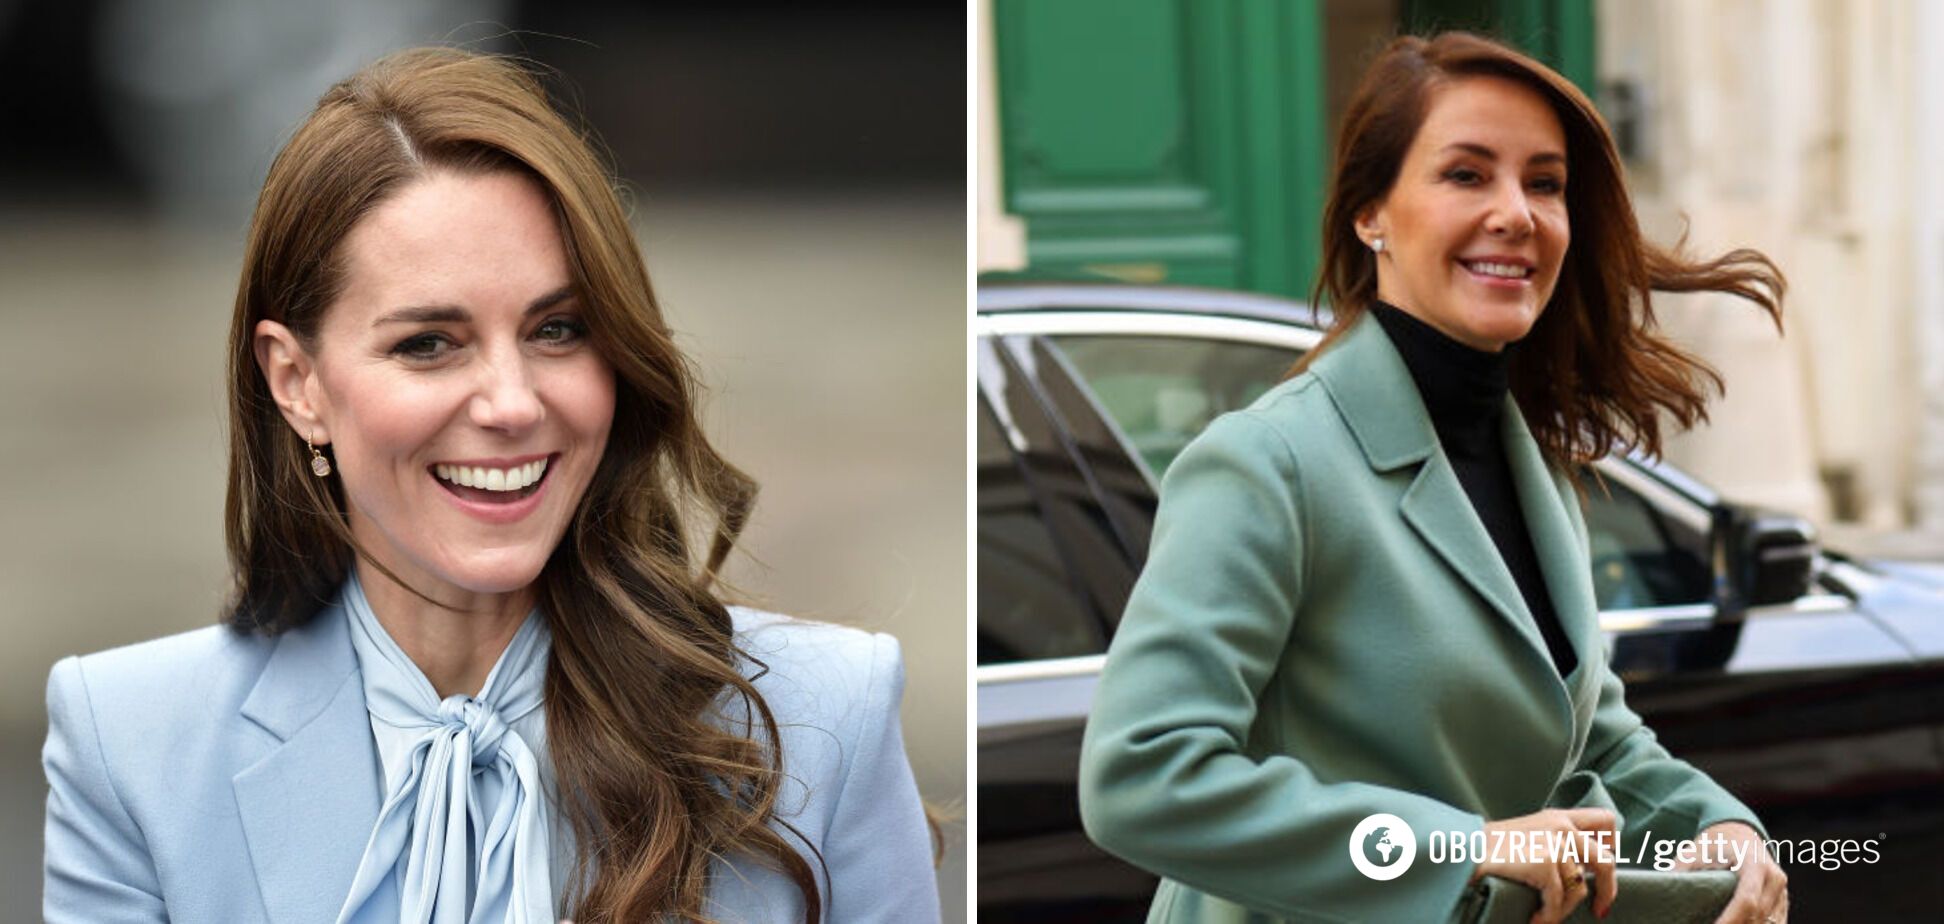 From hairstyle to manicure that breaks the rules. 8 times the Queen of Denmark copied Kate Middleton's look